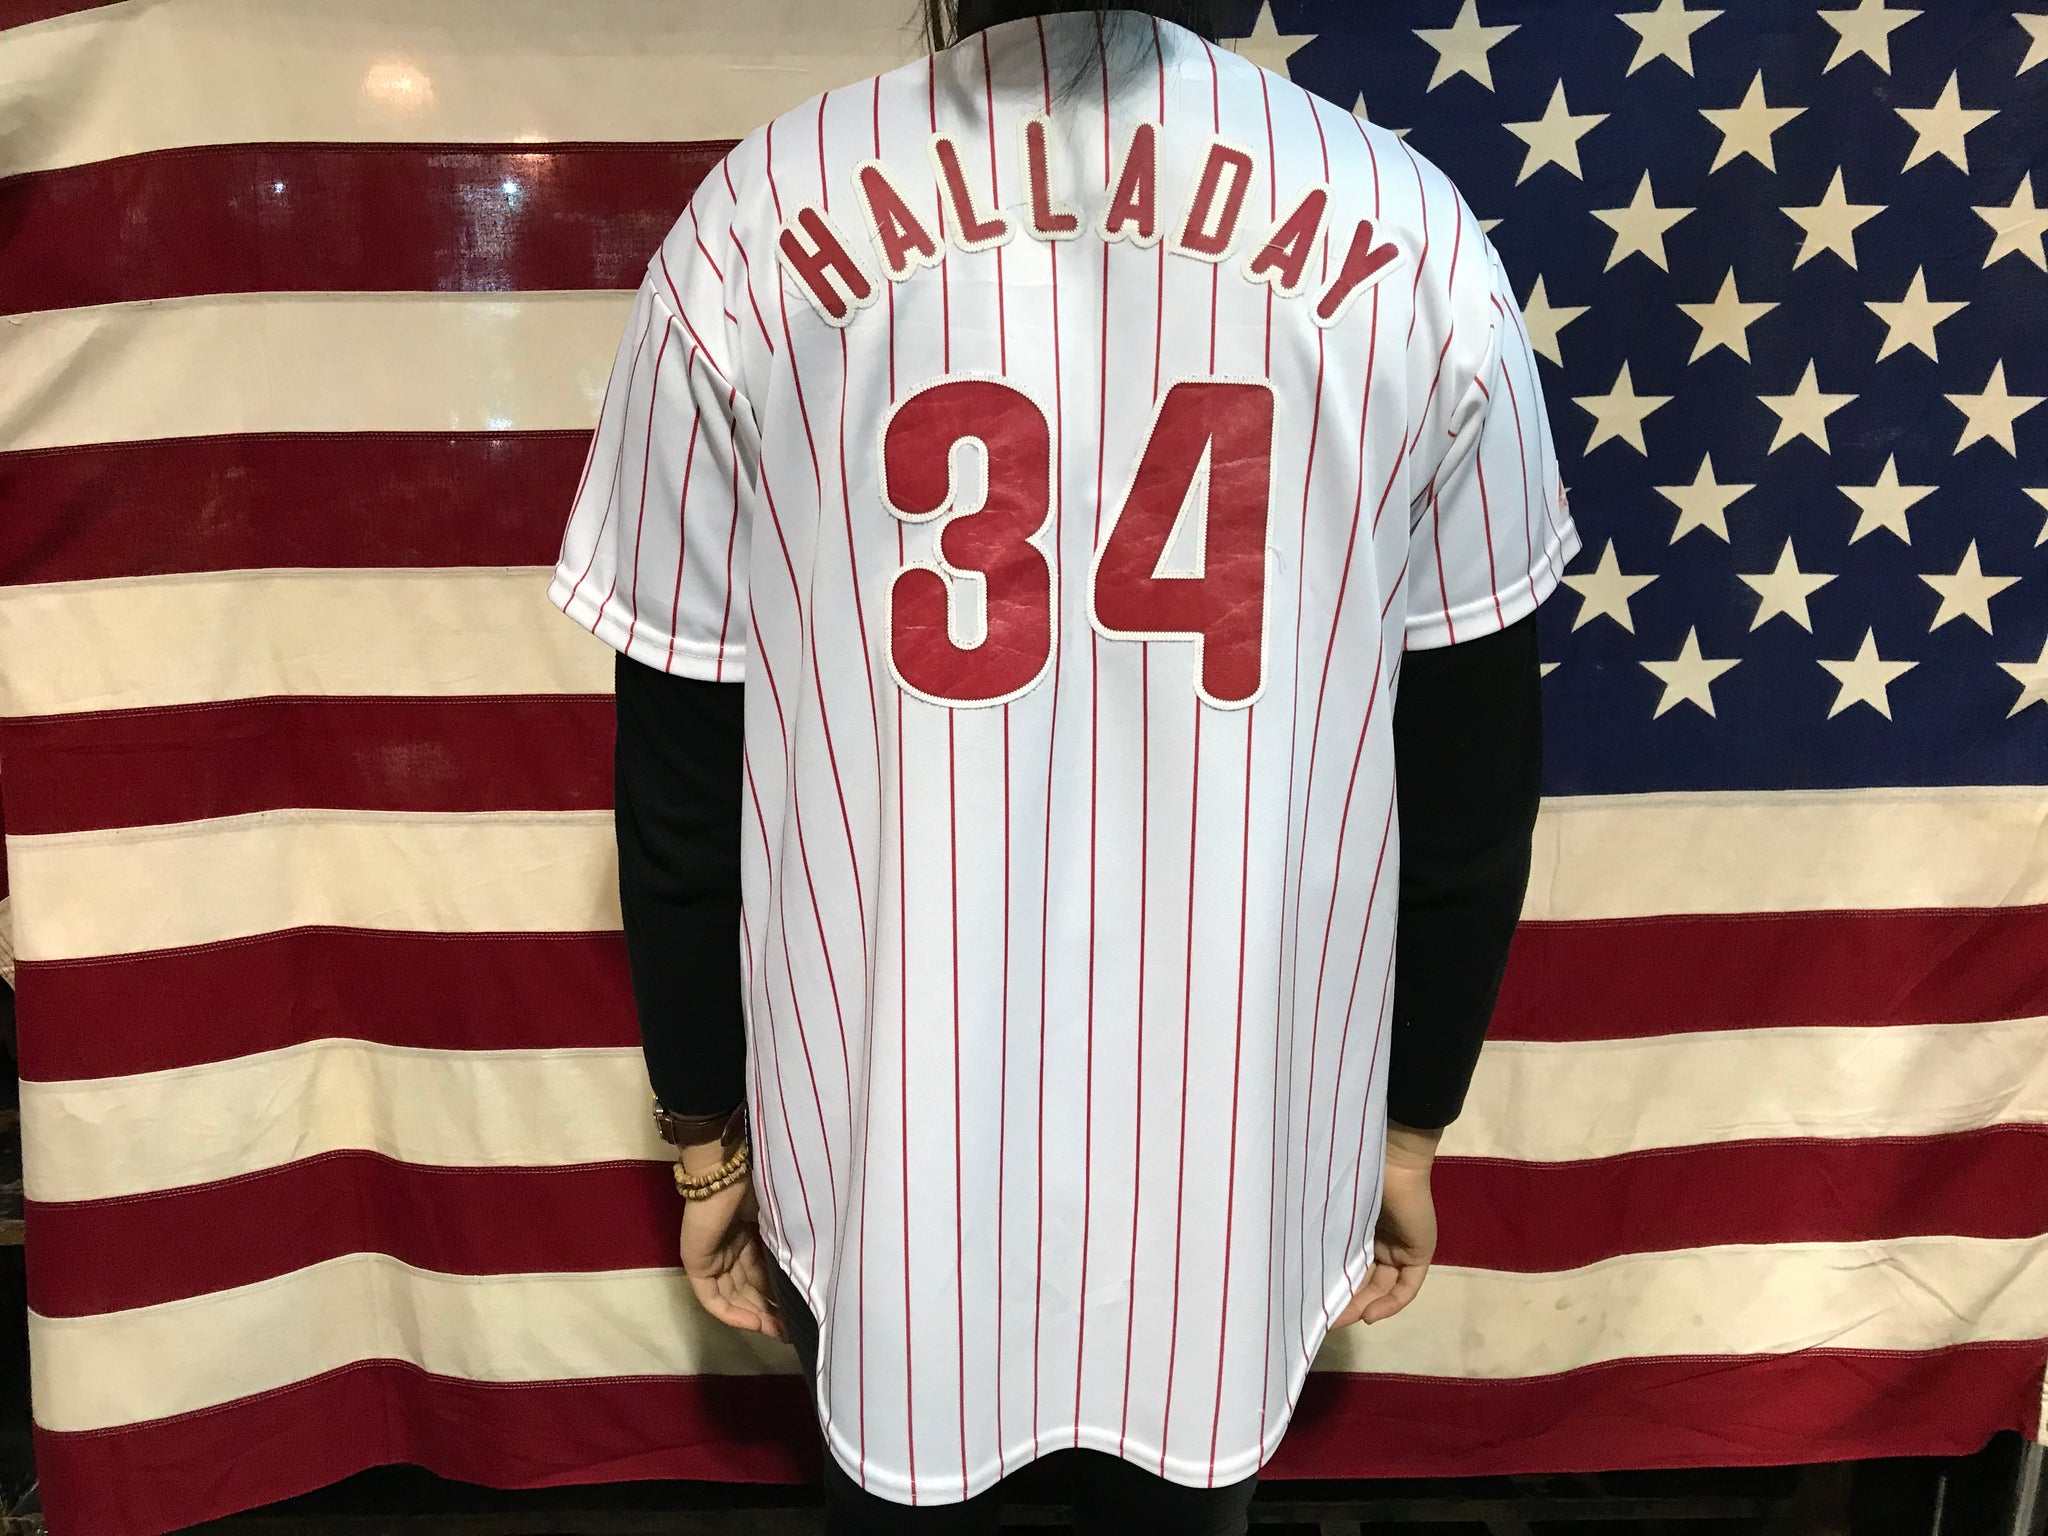 Phillies Baseball Vintage Jersey Player Halladay No 34 by Majestic Made in USA